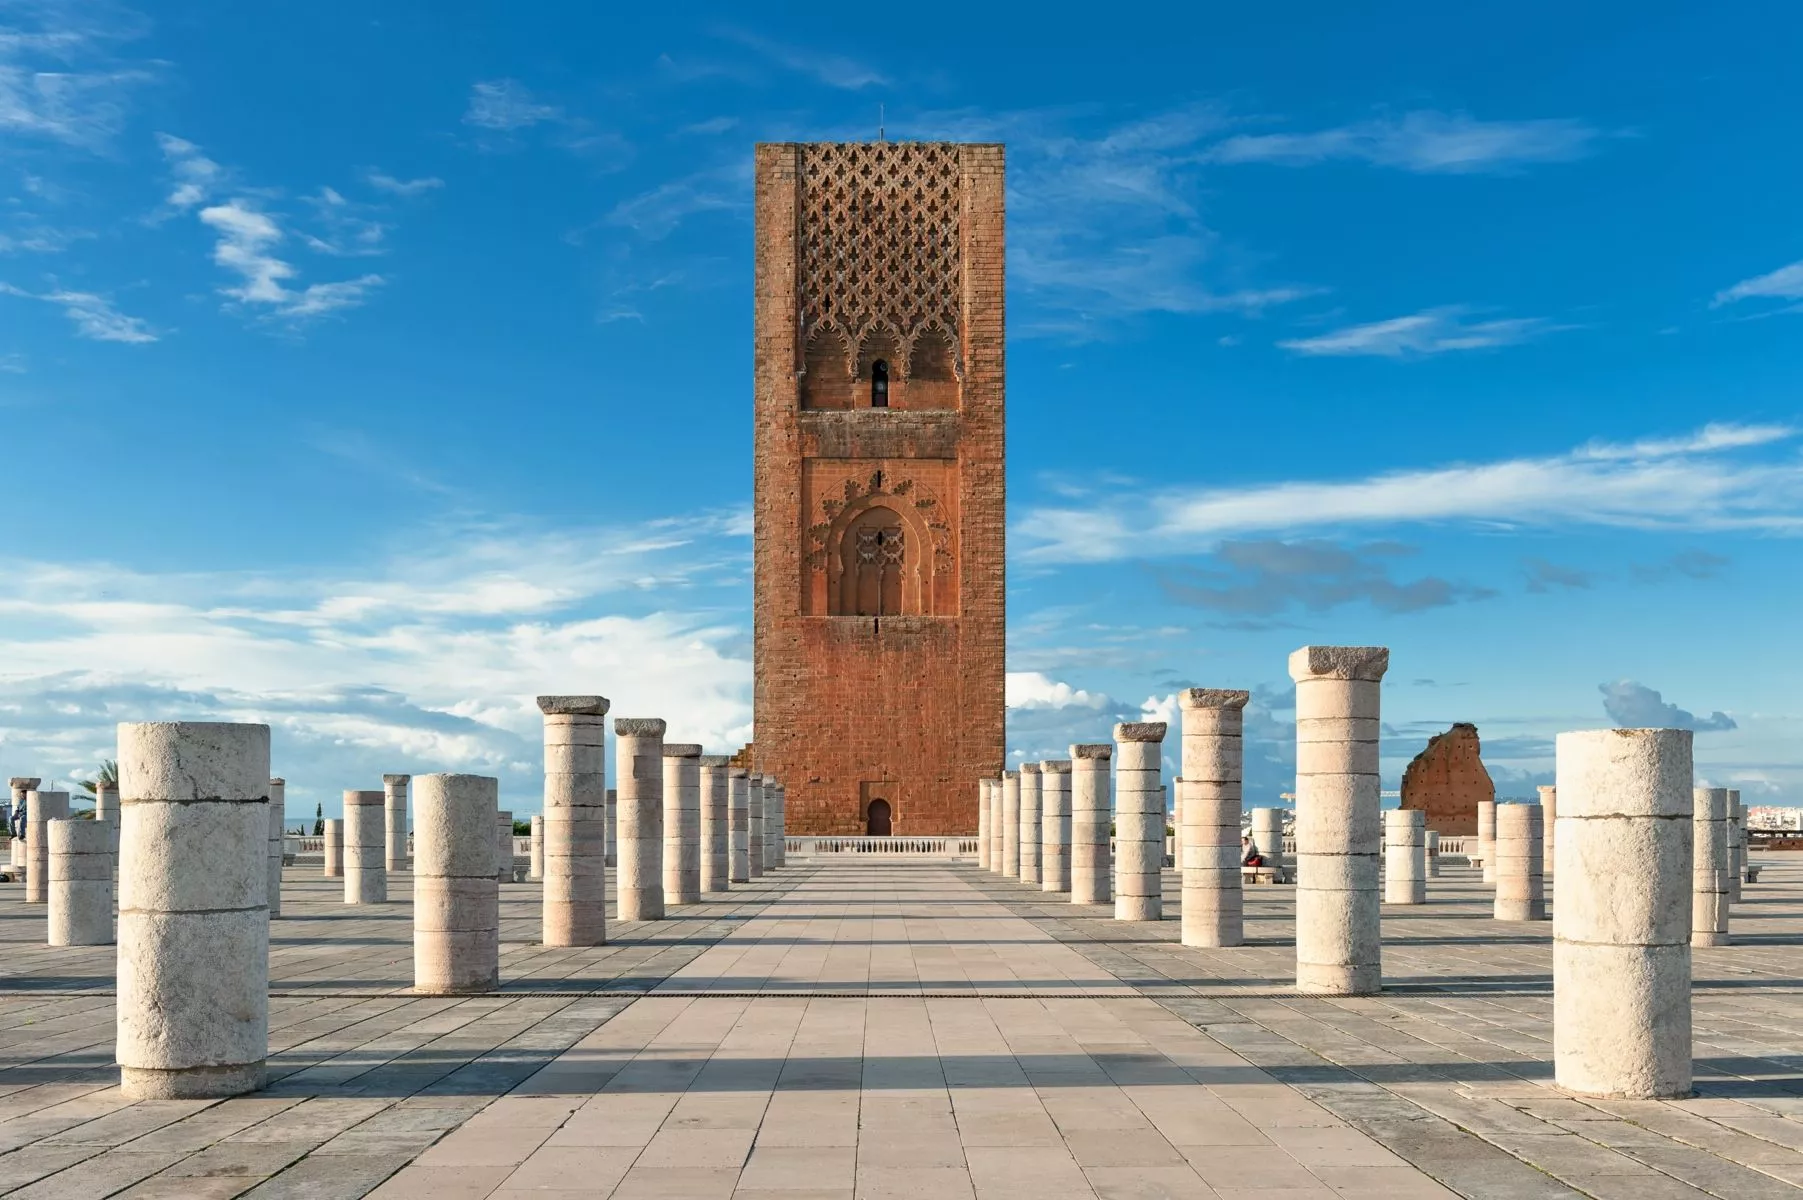 Hassan Minaret in Morocco, Africa | Architecture - Rated 3.8